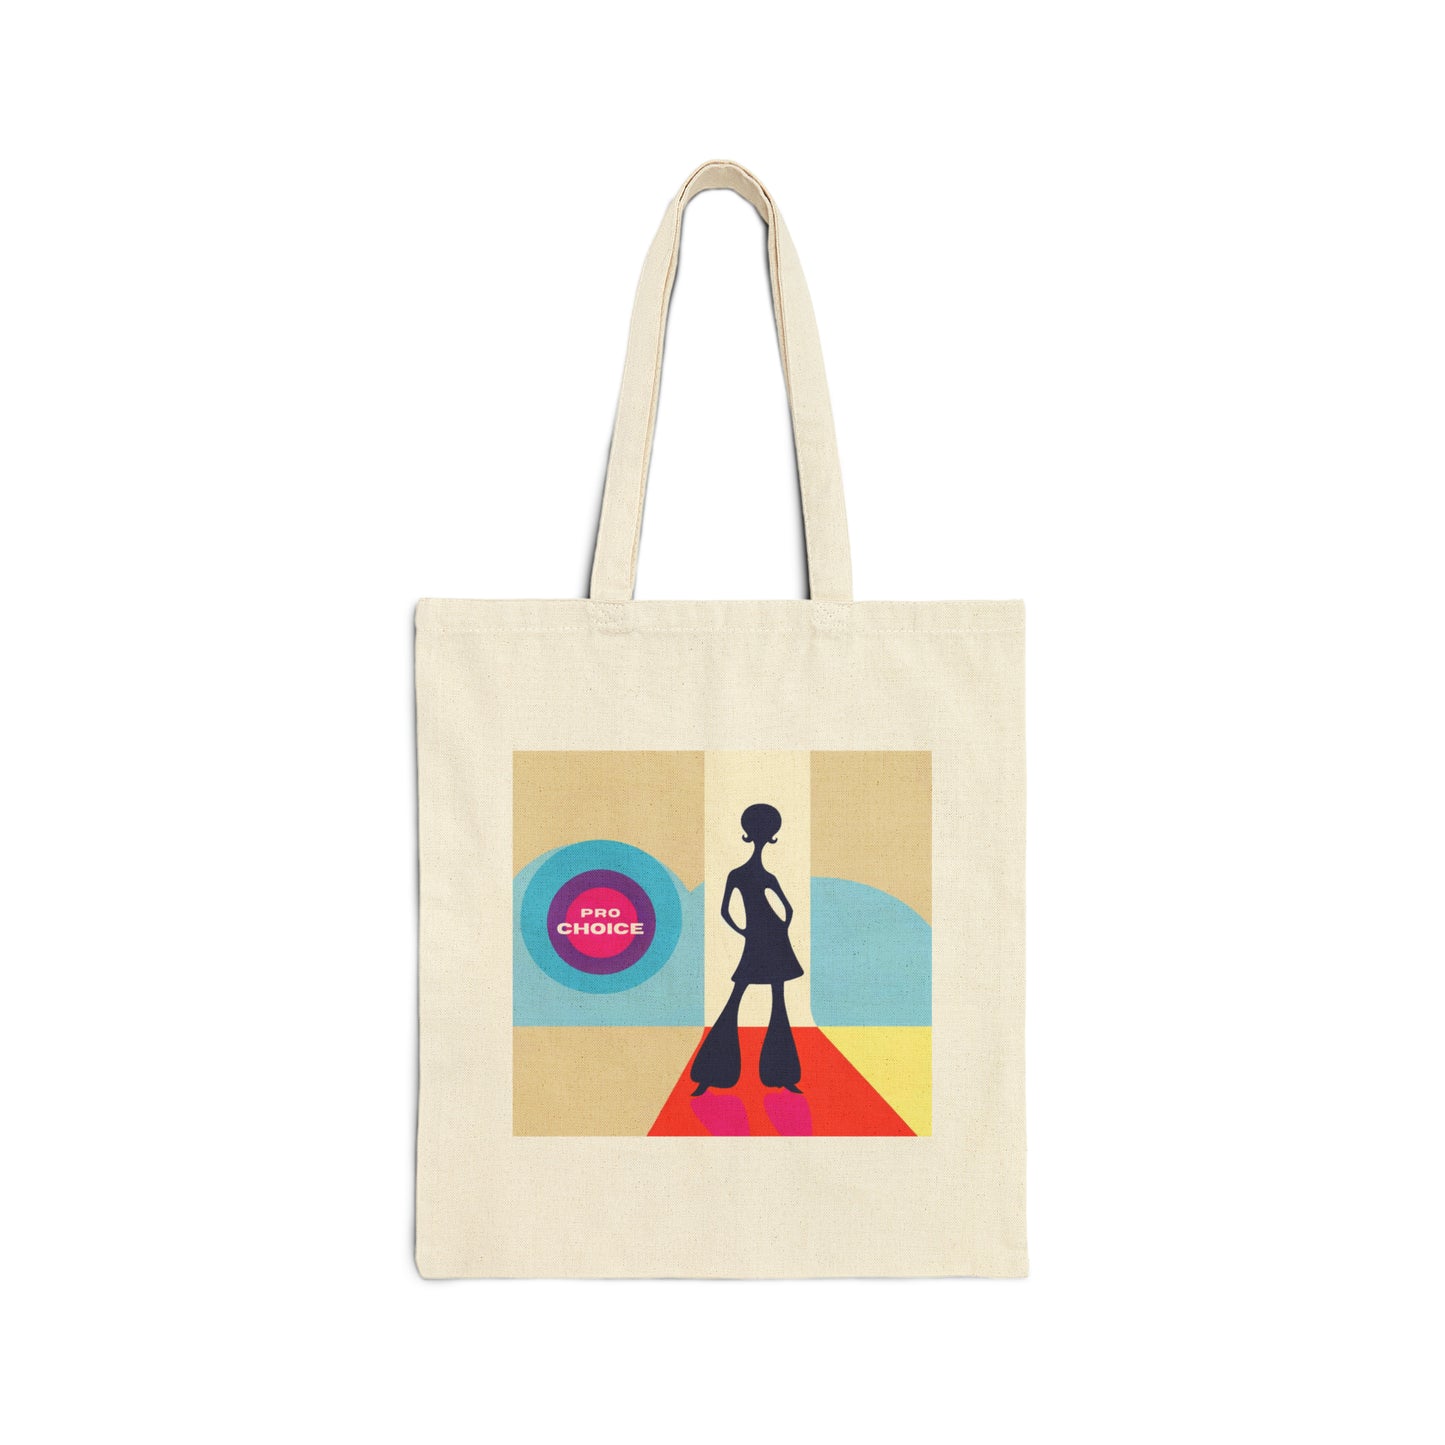 Pro Choice! Bold Statement Cotton Cavas Tote Bag: carry a laptop, kindle, phone, ipad, notebook goodies to work/coffee house